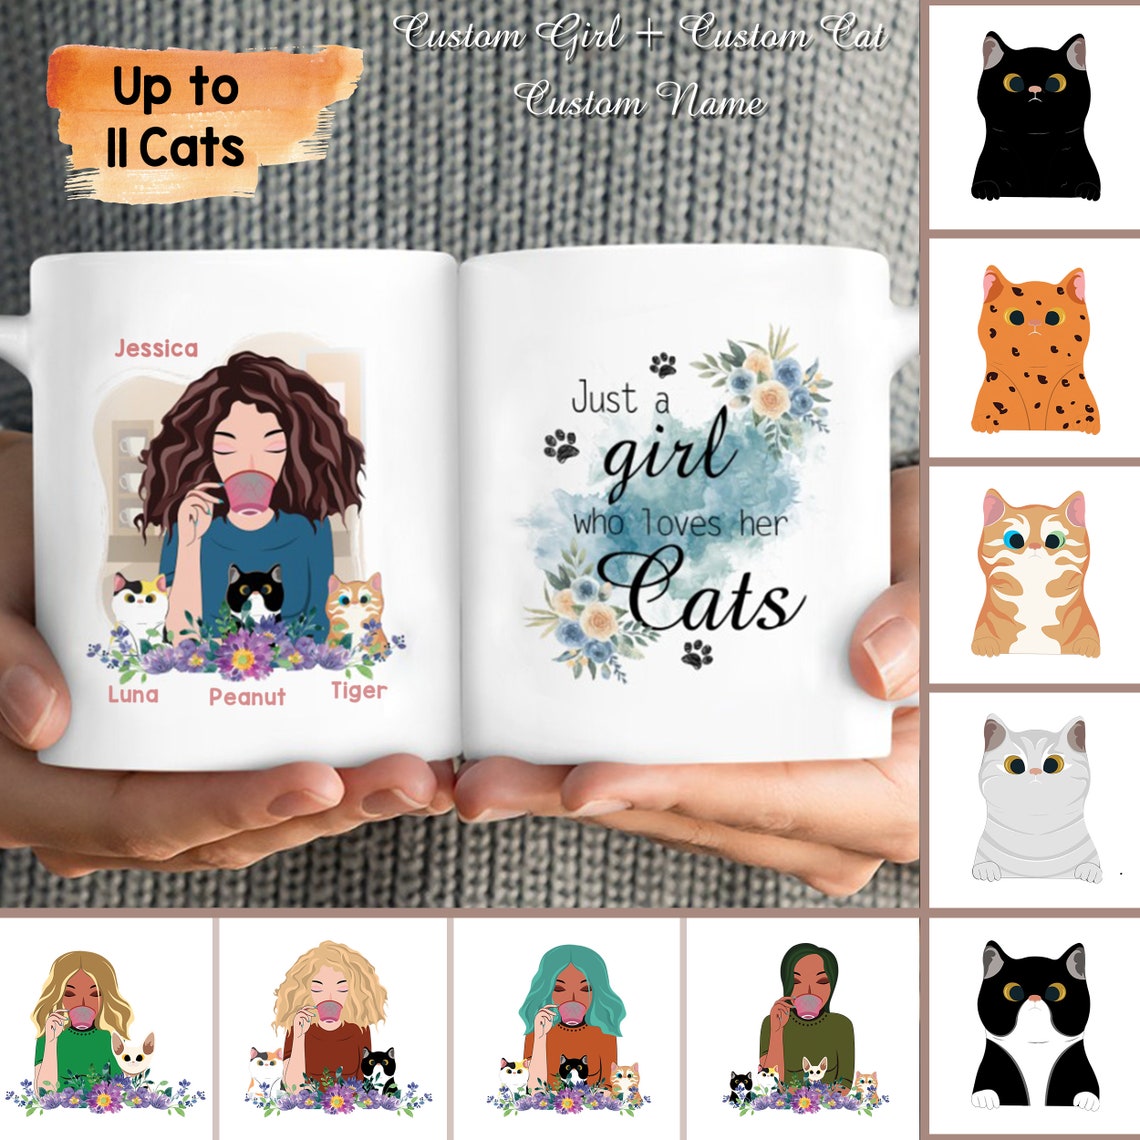 Just A Girl Who Loves Her Cats - Personalized Custom Mug